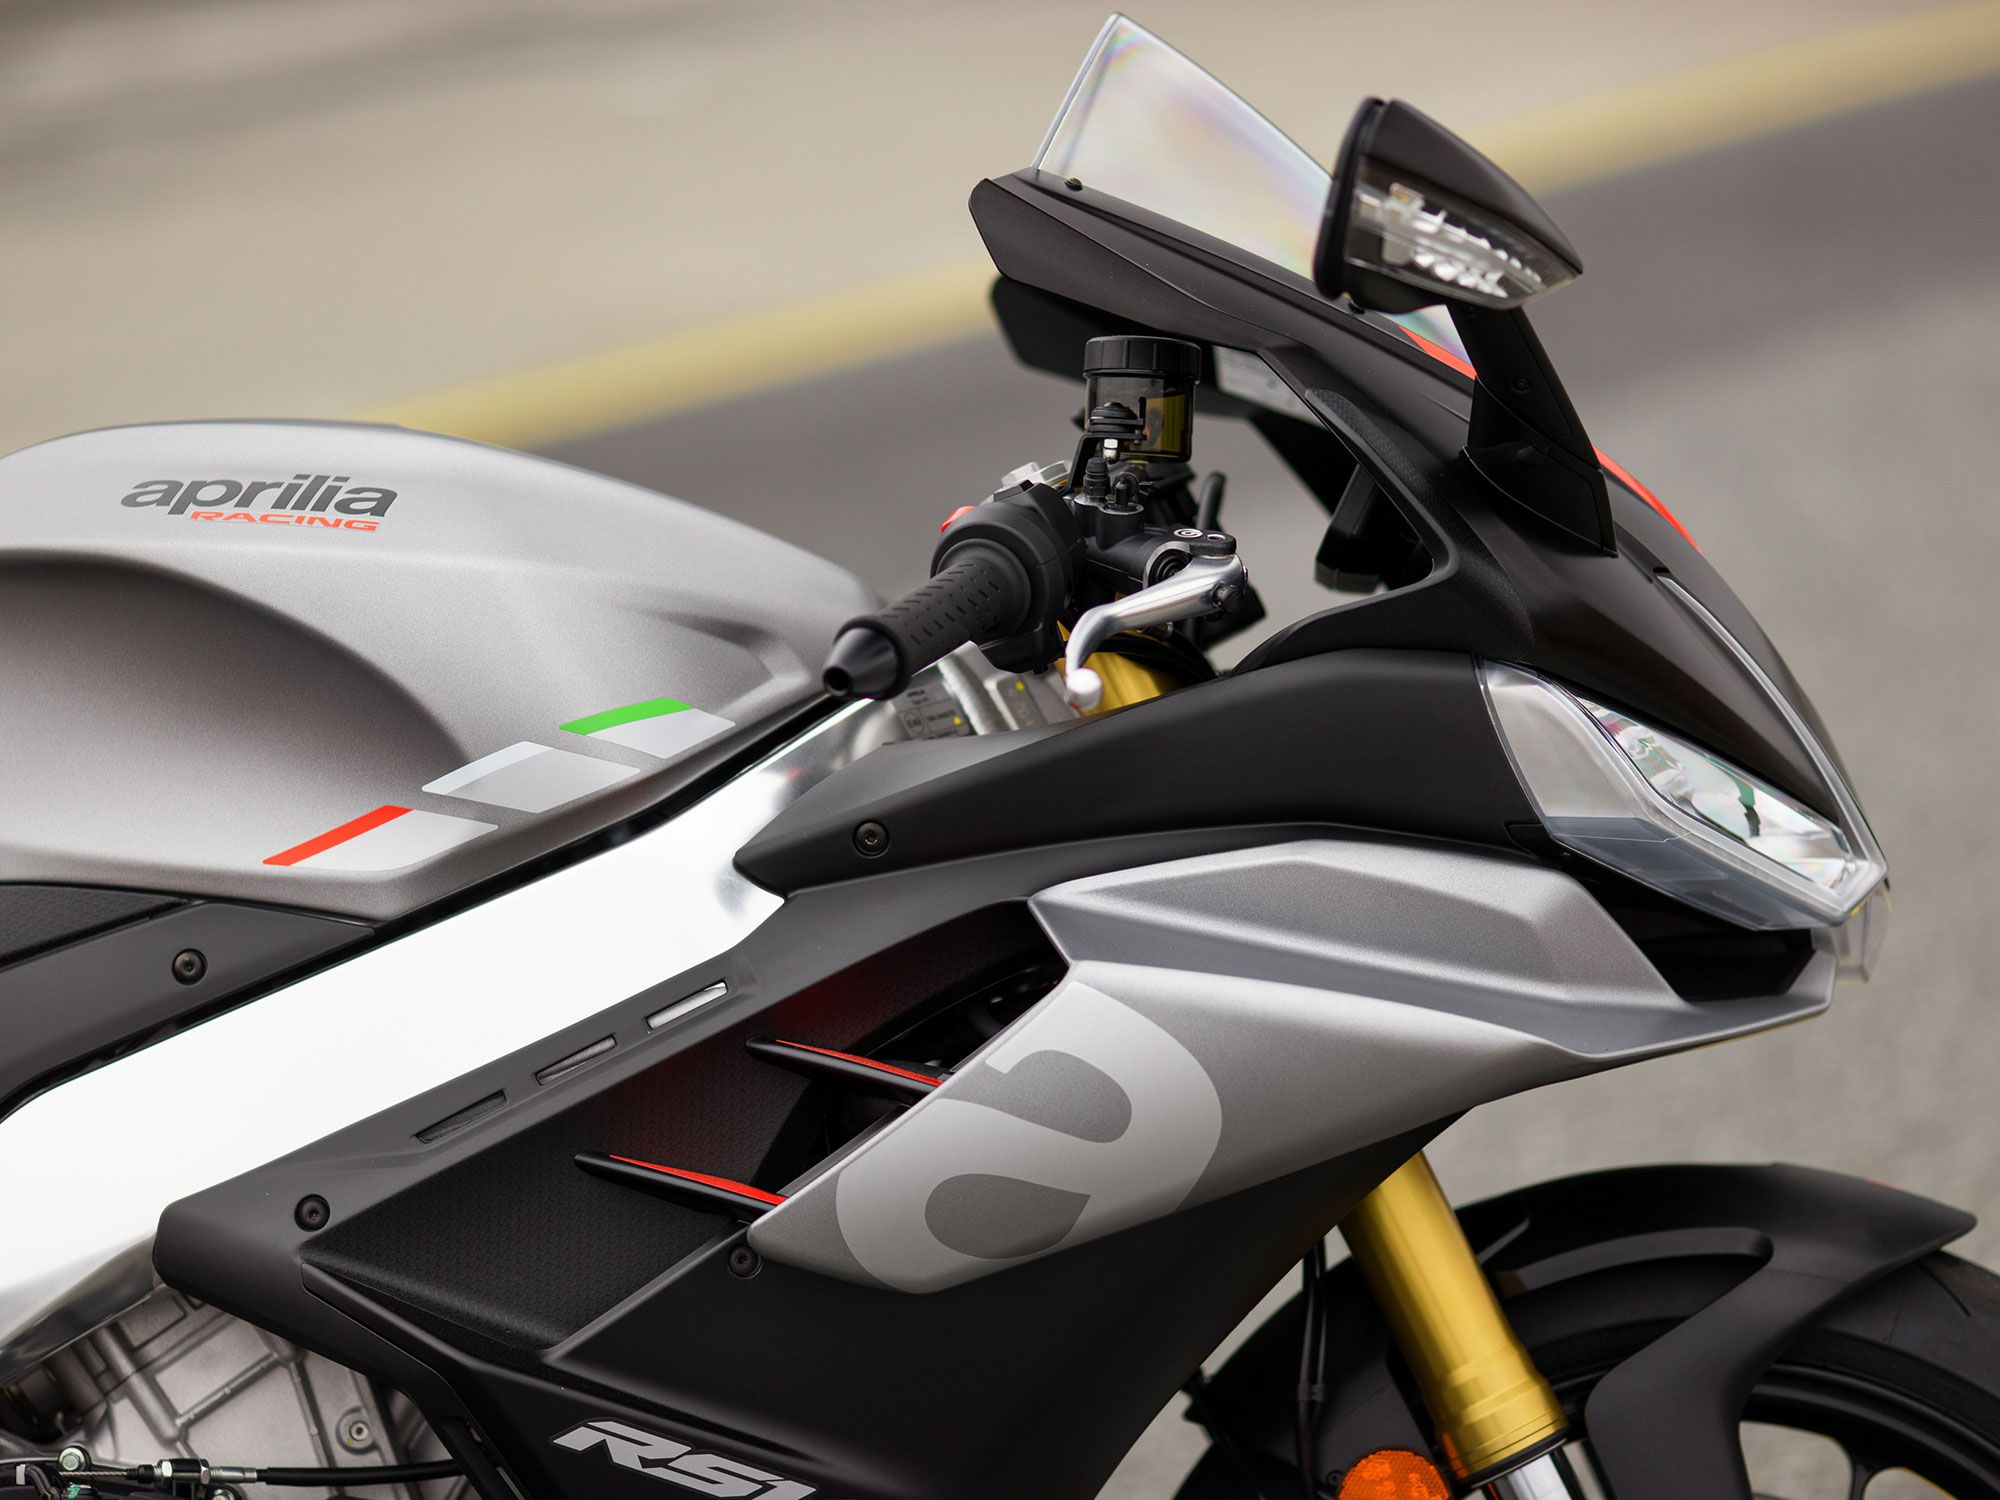 The 2021 RSV4 sports a wider front fairing that does a better job of keeping the rider’s torso in a cocoon like bubble of speed.